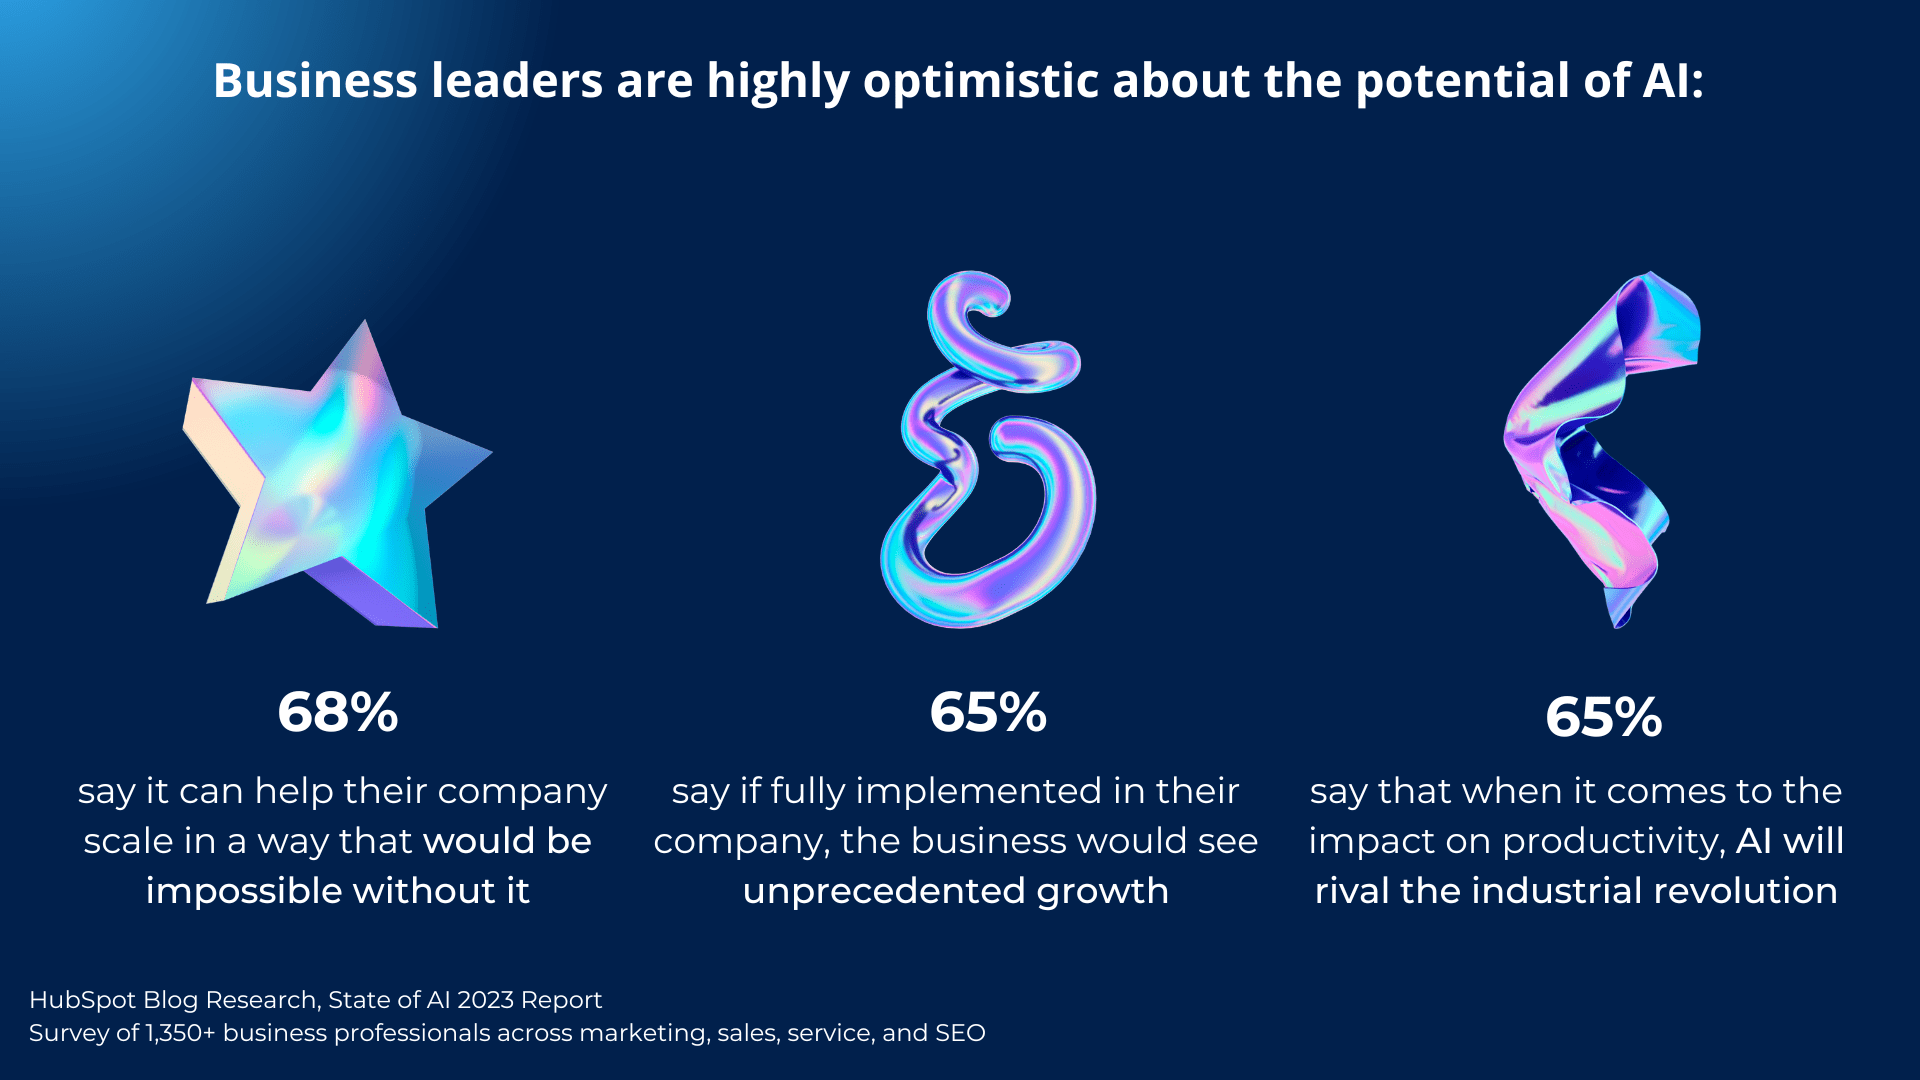 business%20leaders%20are%20optimistic%20about%20AI.png?width=1920&height=1080&name=business%20leaders%20are%20optimistic%20about%20AI - The HubSpot Blog’s State of AI Report [Key Findings from 1300+ Business Professionals]